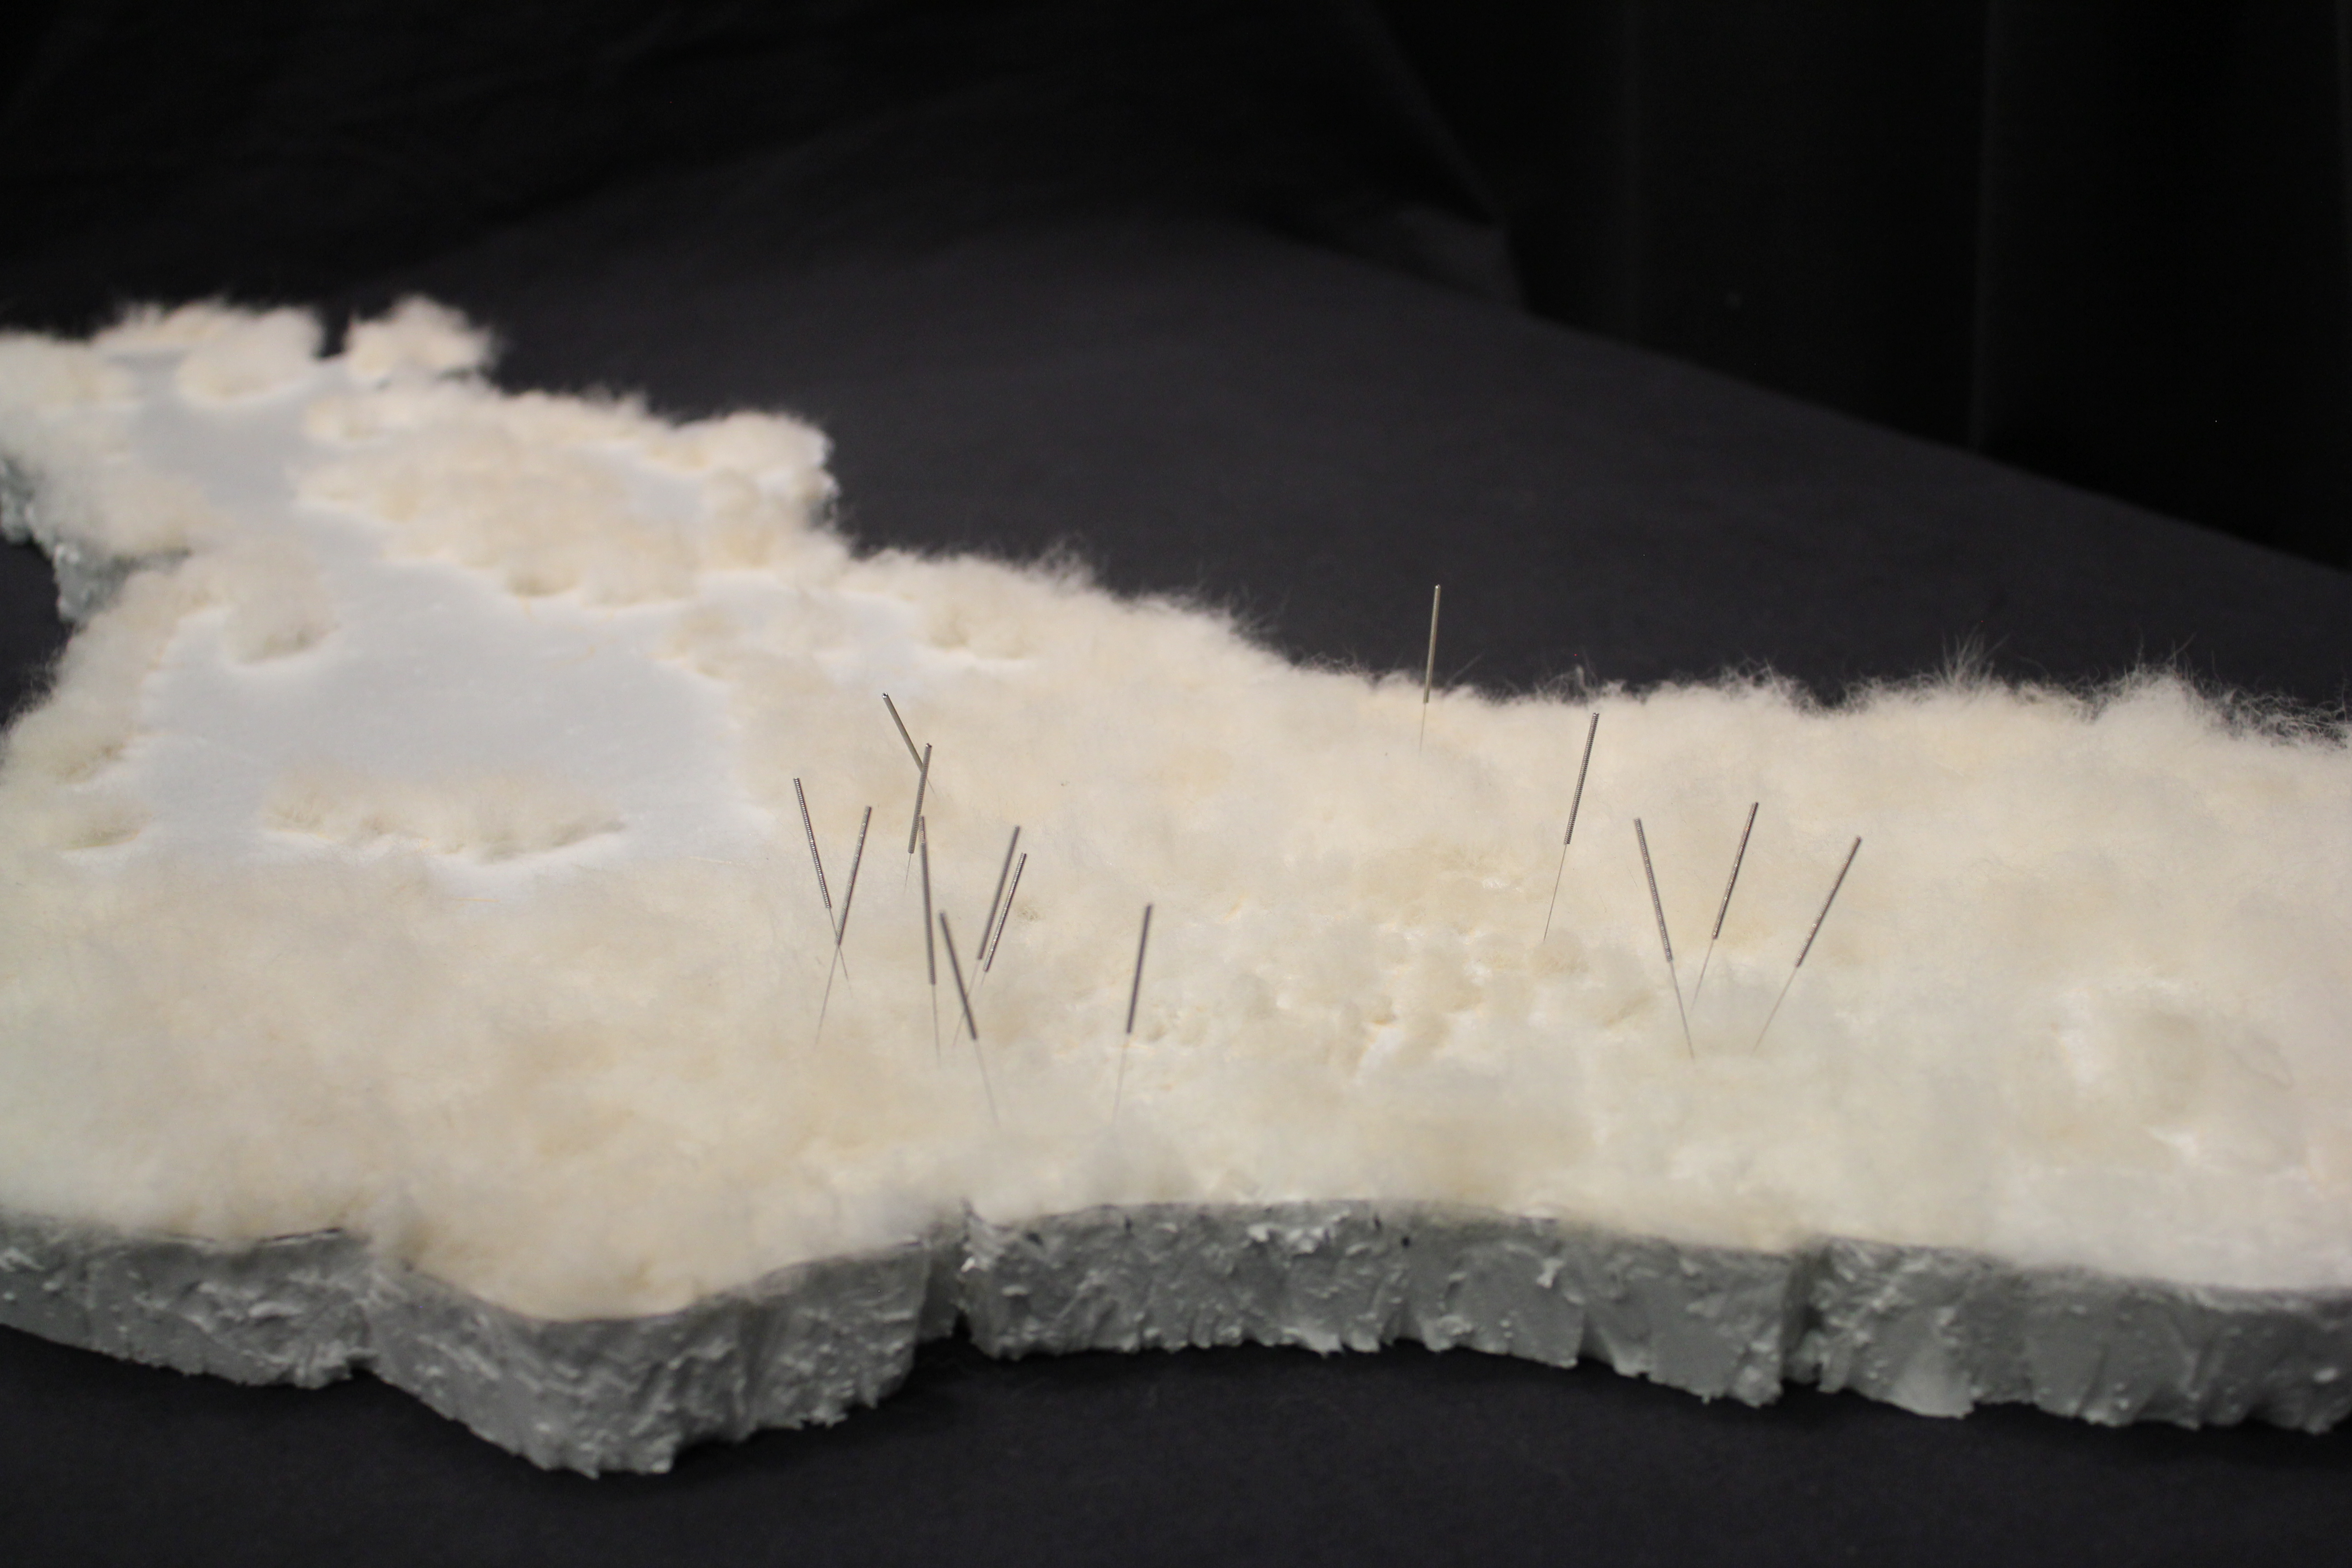 View of the map with several acupuncture needles and fur covering